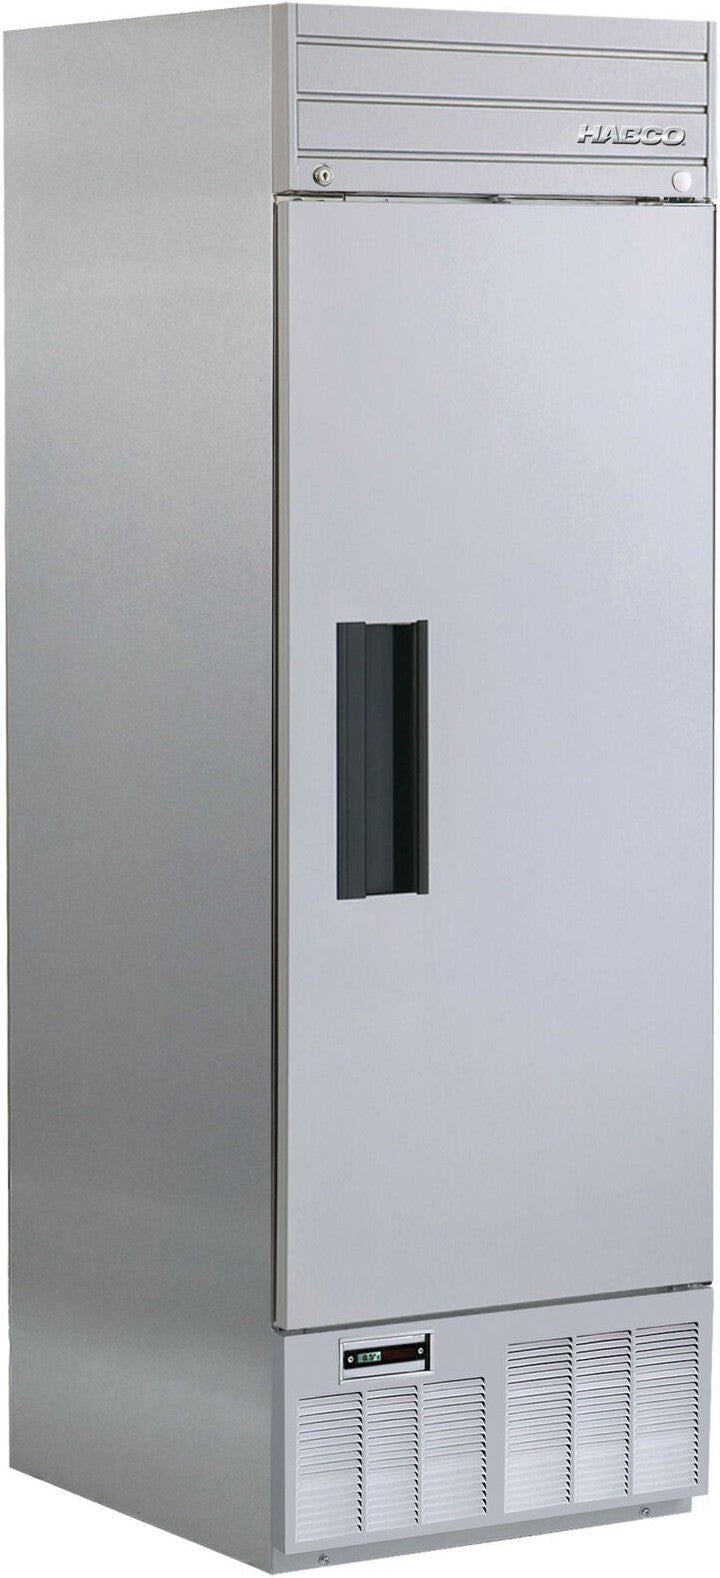 Habco - 23.9" Solid Single Swing Door Refrigerator with Stainless Steel Xterior - SE24HCSX